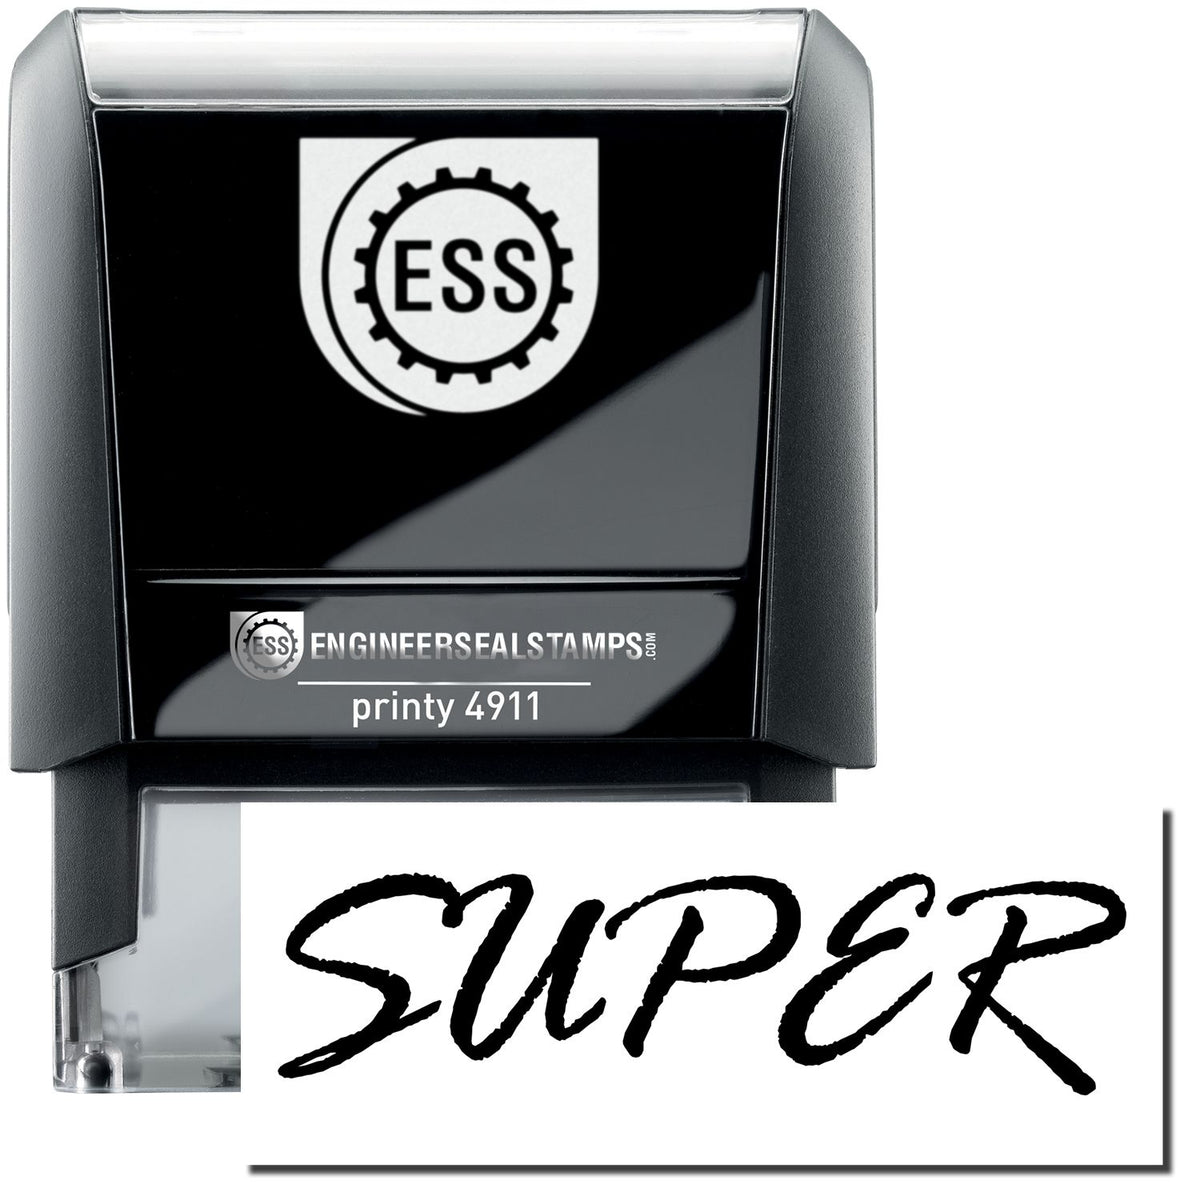 A self-inking stamp with a stamped image showing how the text &quot;SUPER&quot; is displayed after stamping.